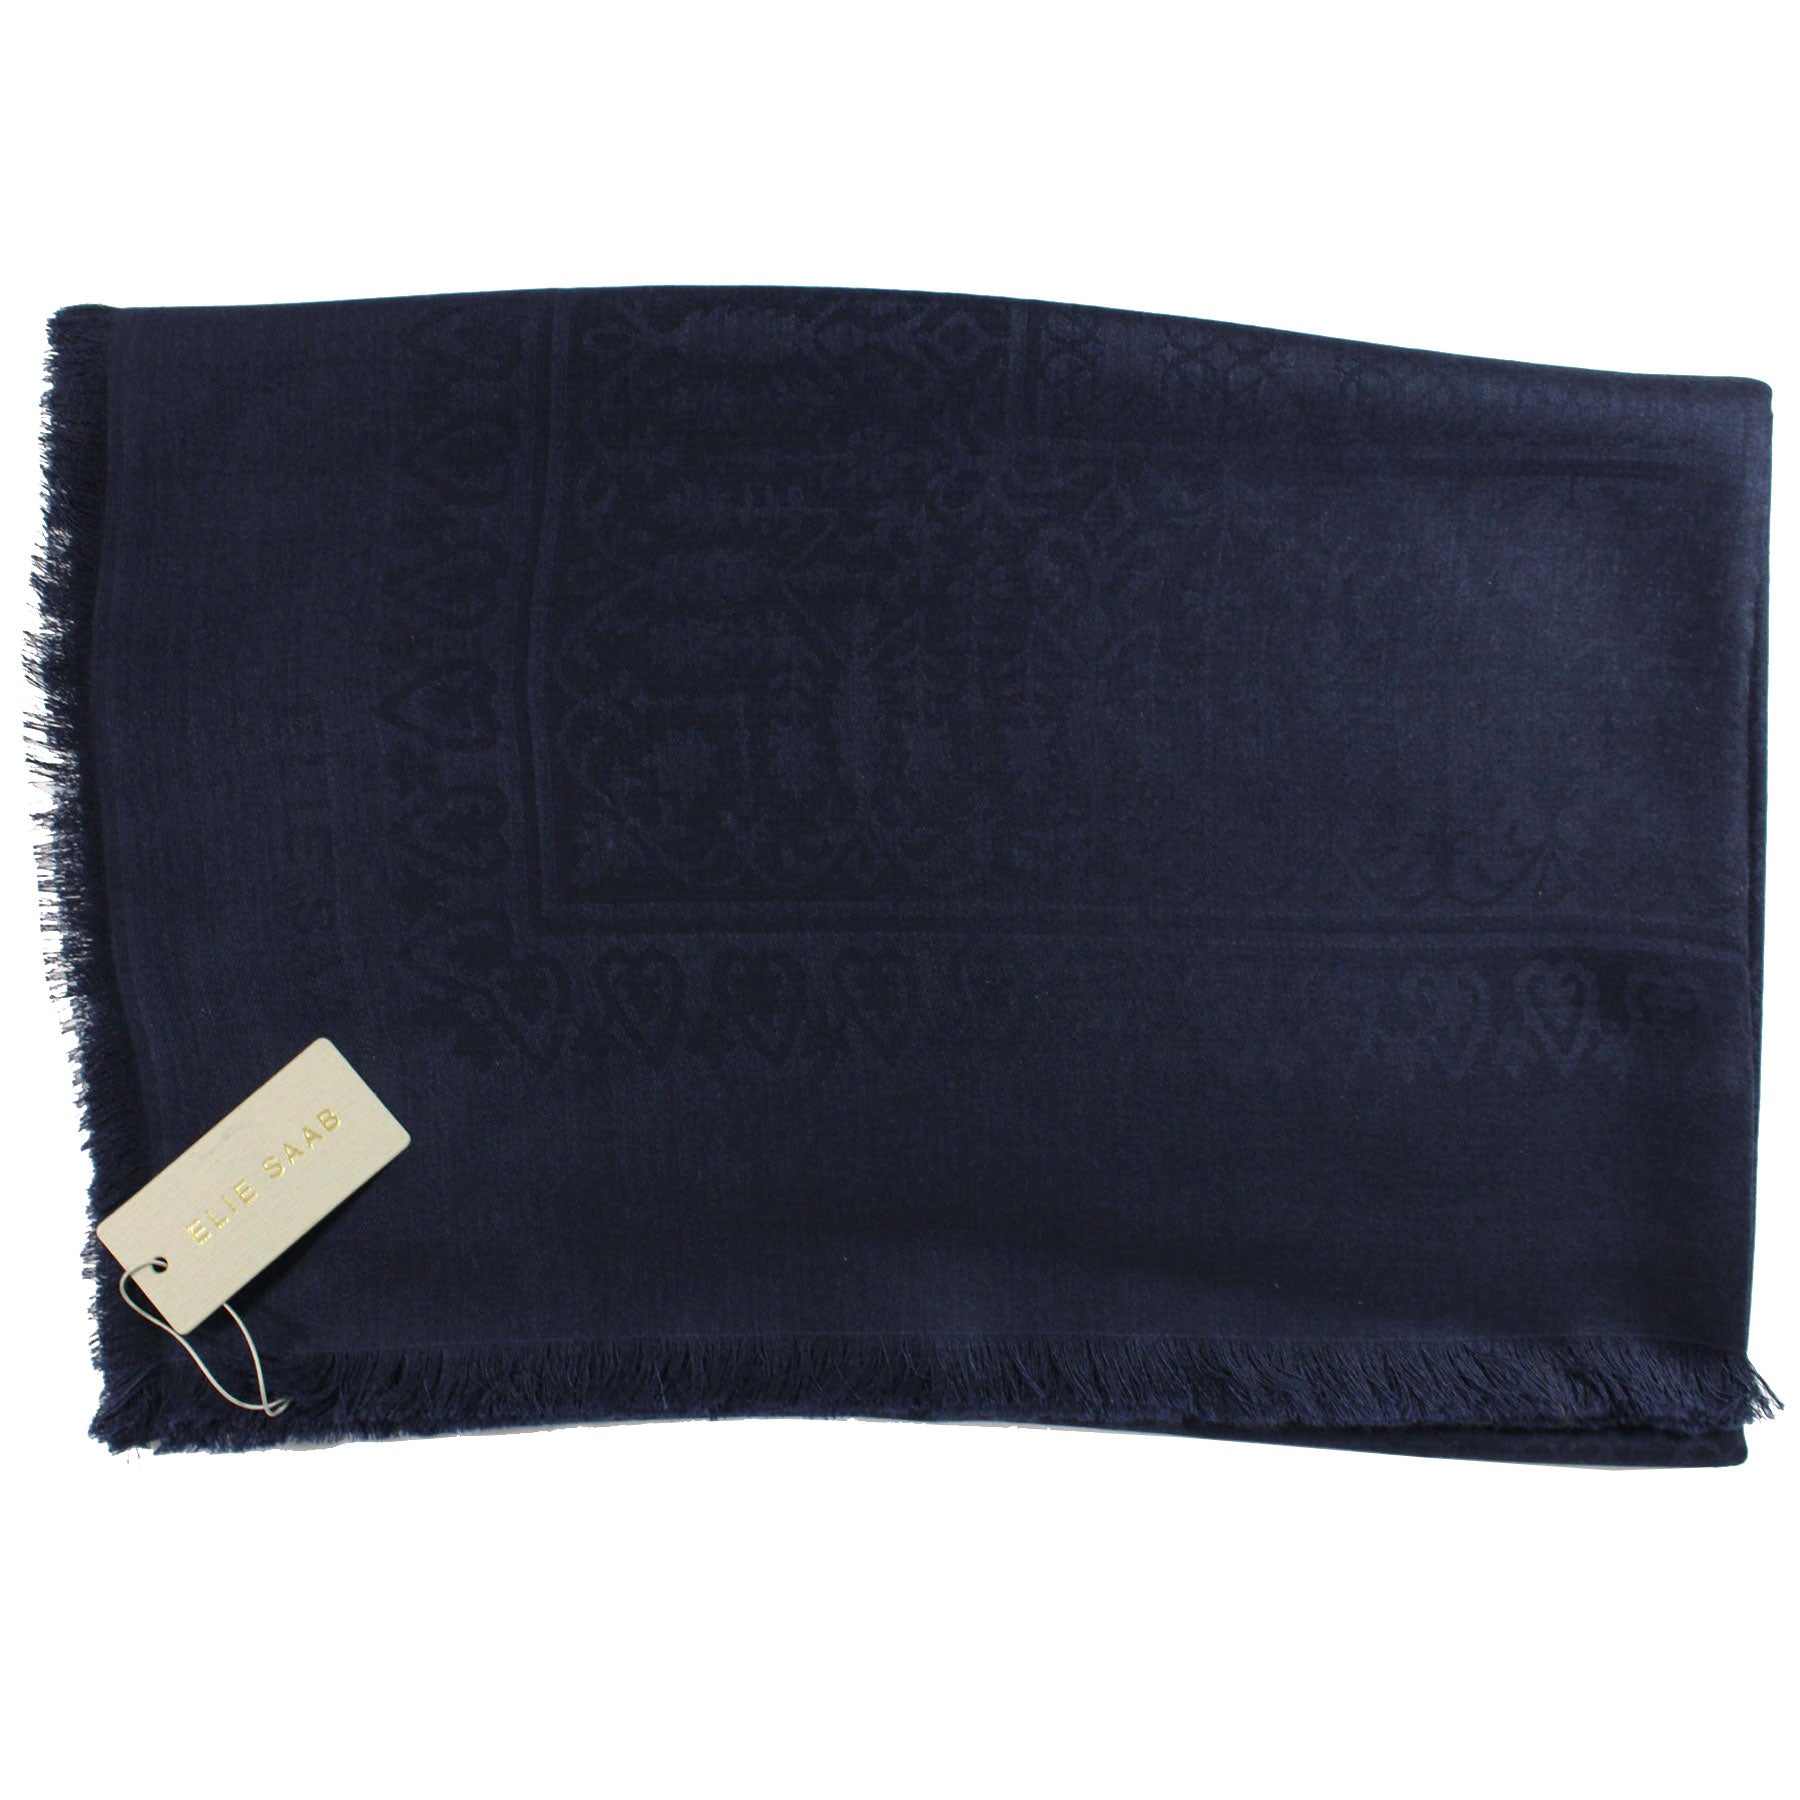 Elie Saab Scarf Navy Design - Extra Large 55 Inch Square Wool Silk Wrap